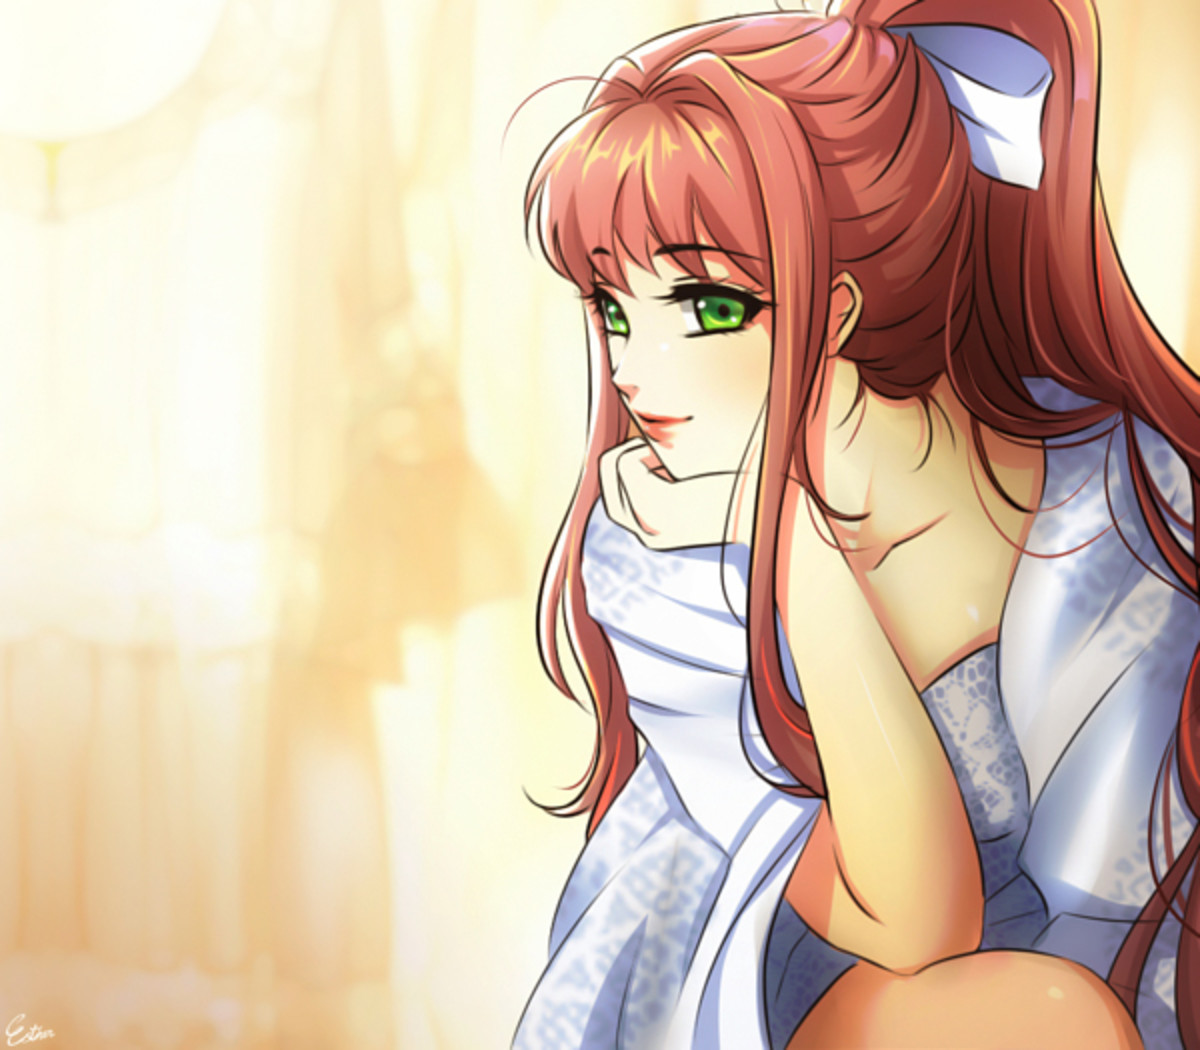 Daily Monika 1053. Good morning, have a great day! join list: DailyMonika (286 subs)Mention History I am quite sure he thinks that I am God-- Since he is God on